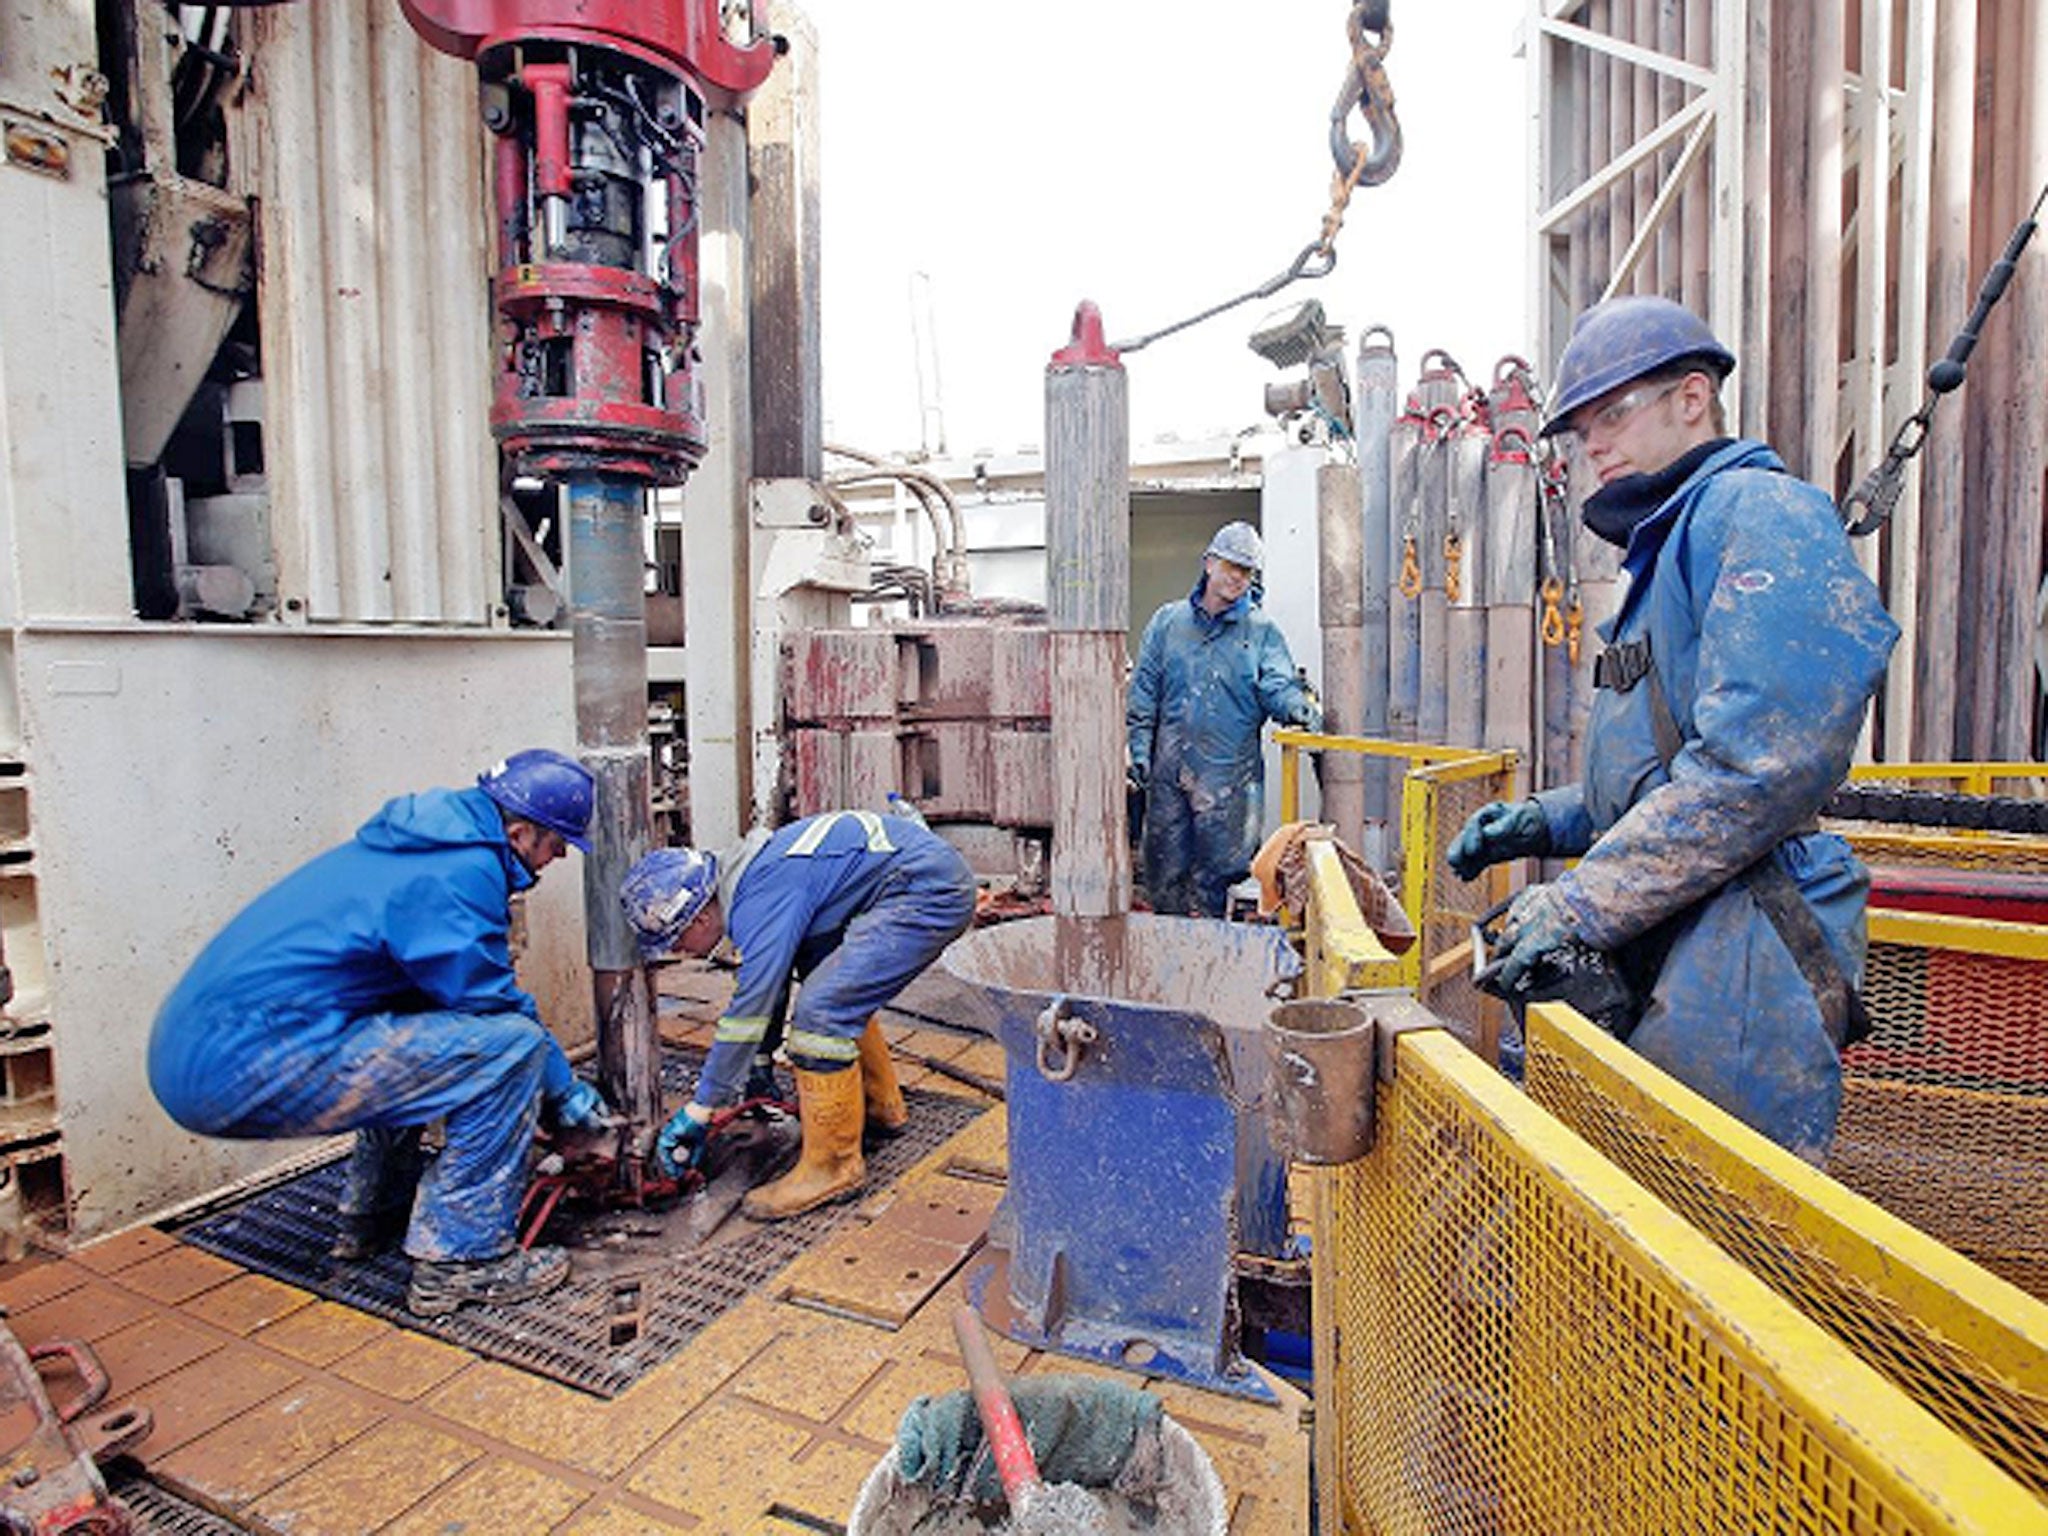 Engineers working on the drilling platform of the Cuadrilla shale fracking facility in Preston, Lancashire